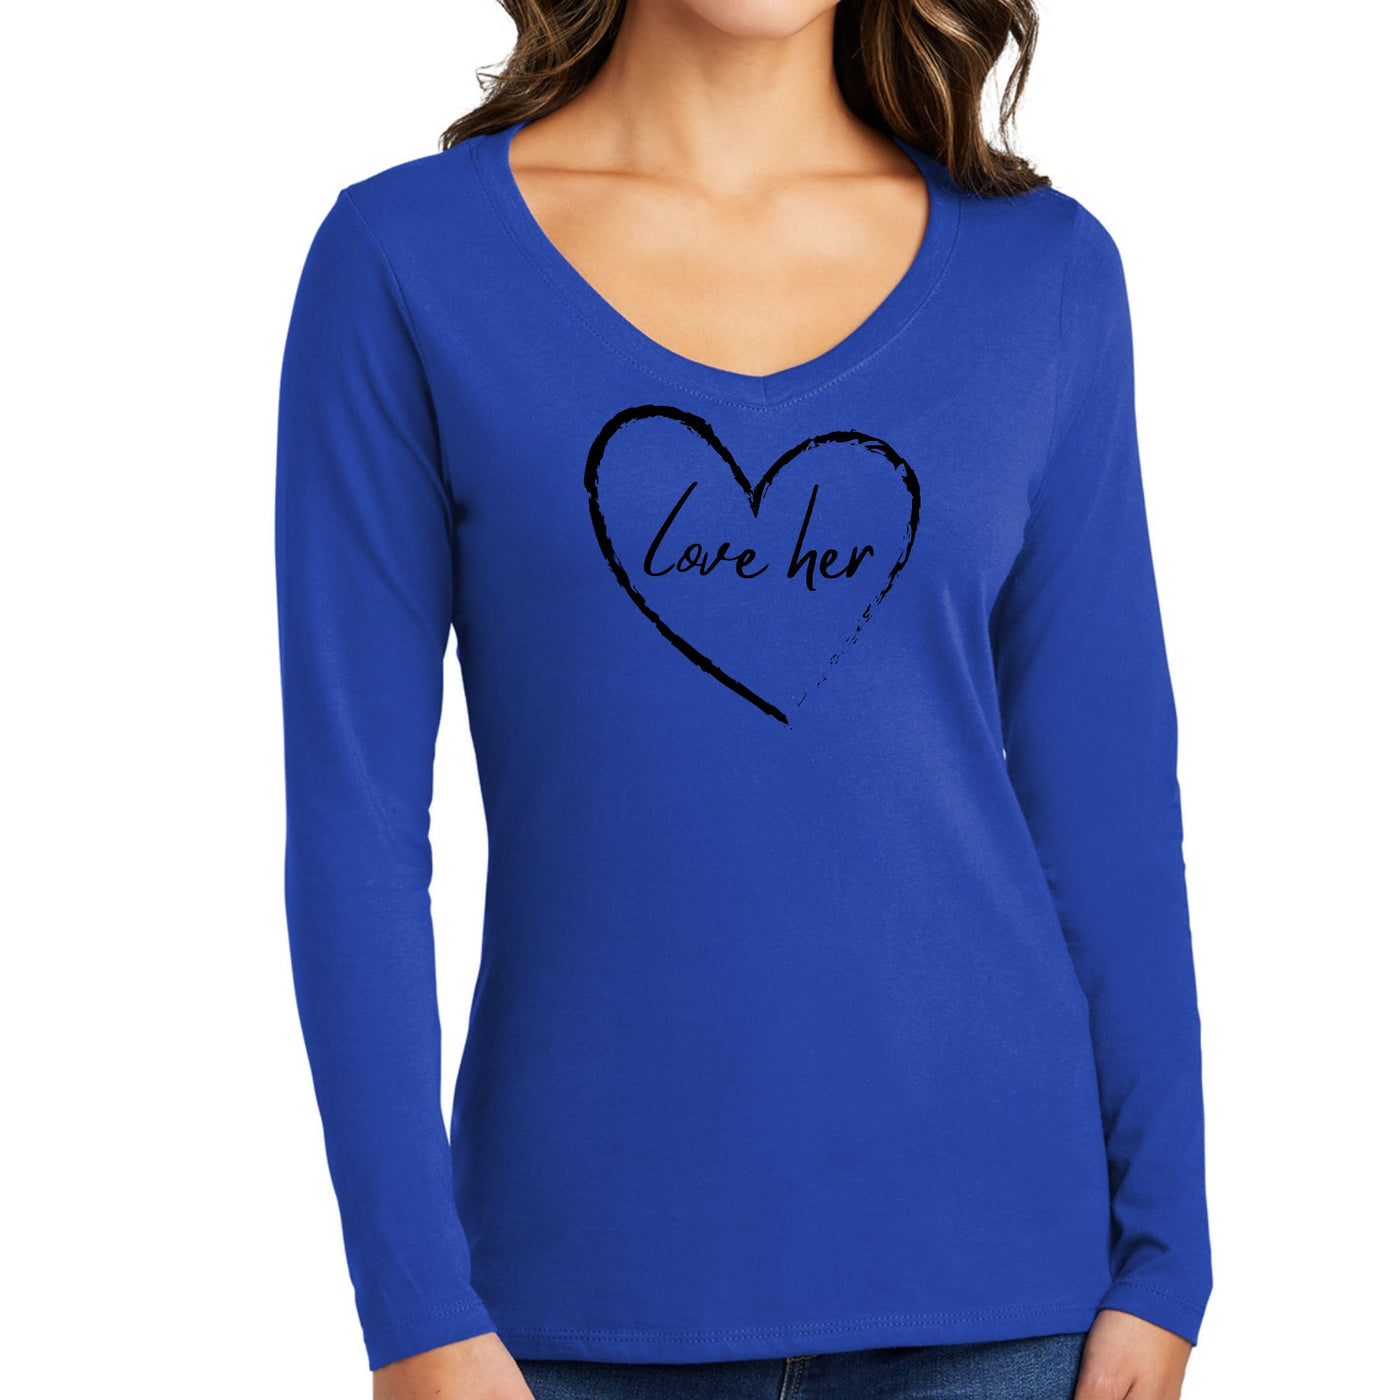 Womens Long Sleeve V-neck Graphic T-shirt Say It Soul Love Her - Womens